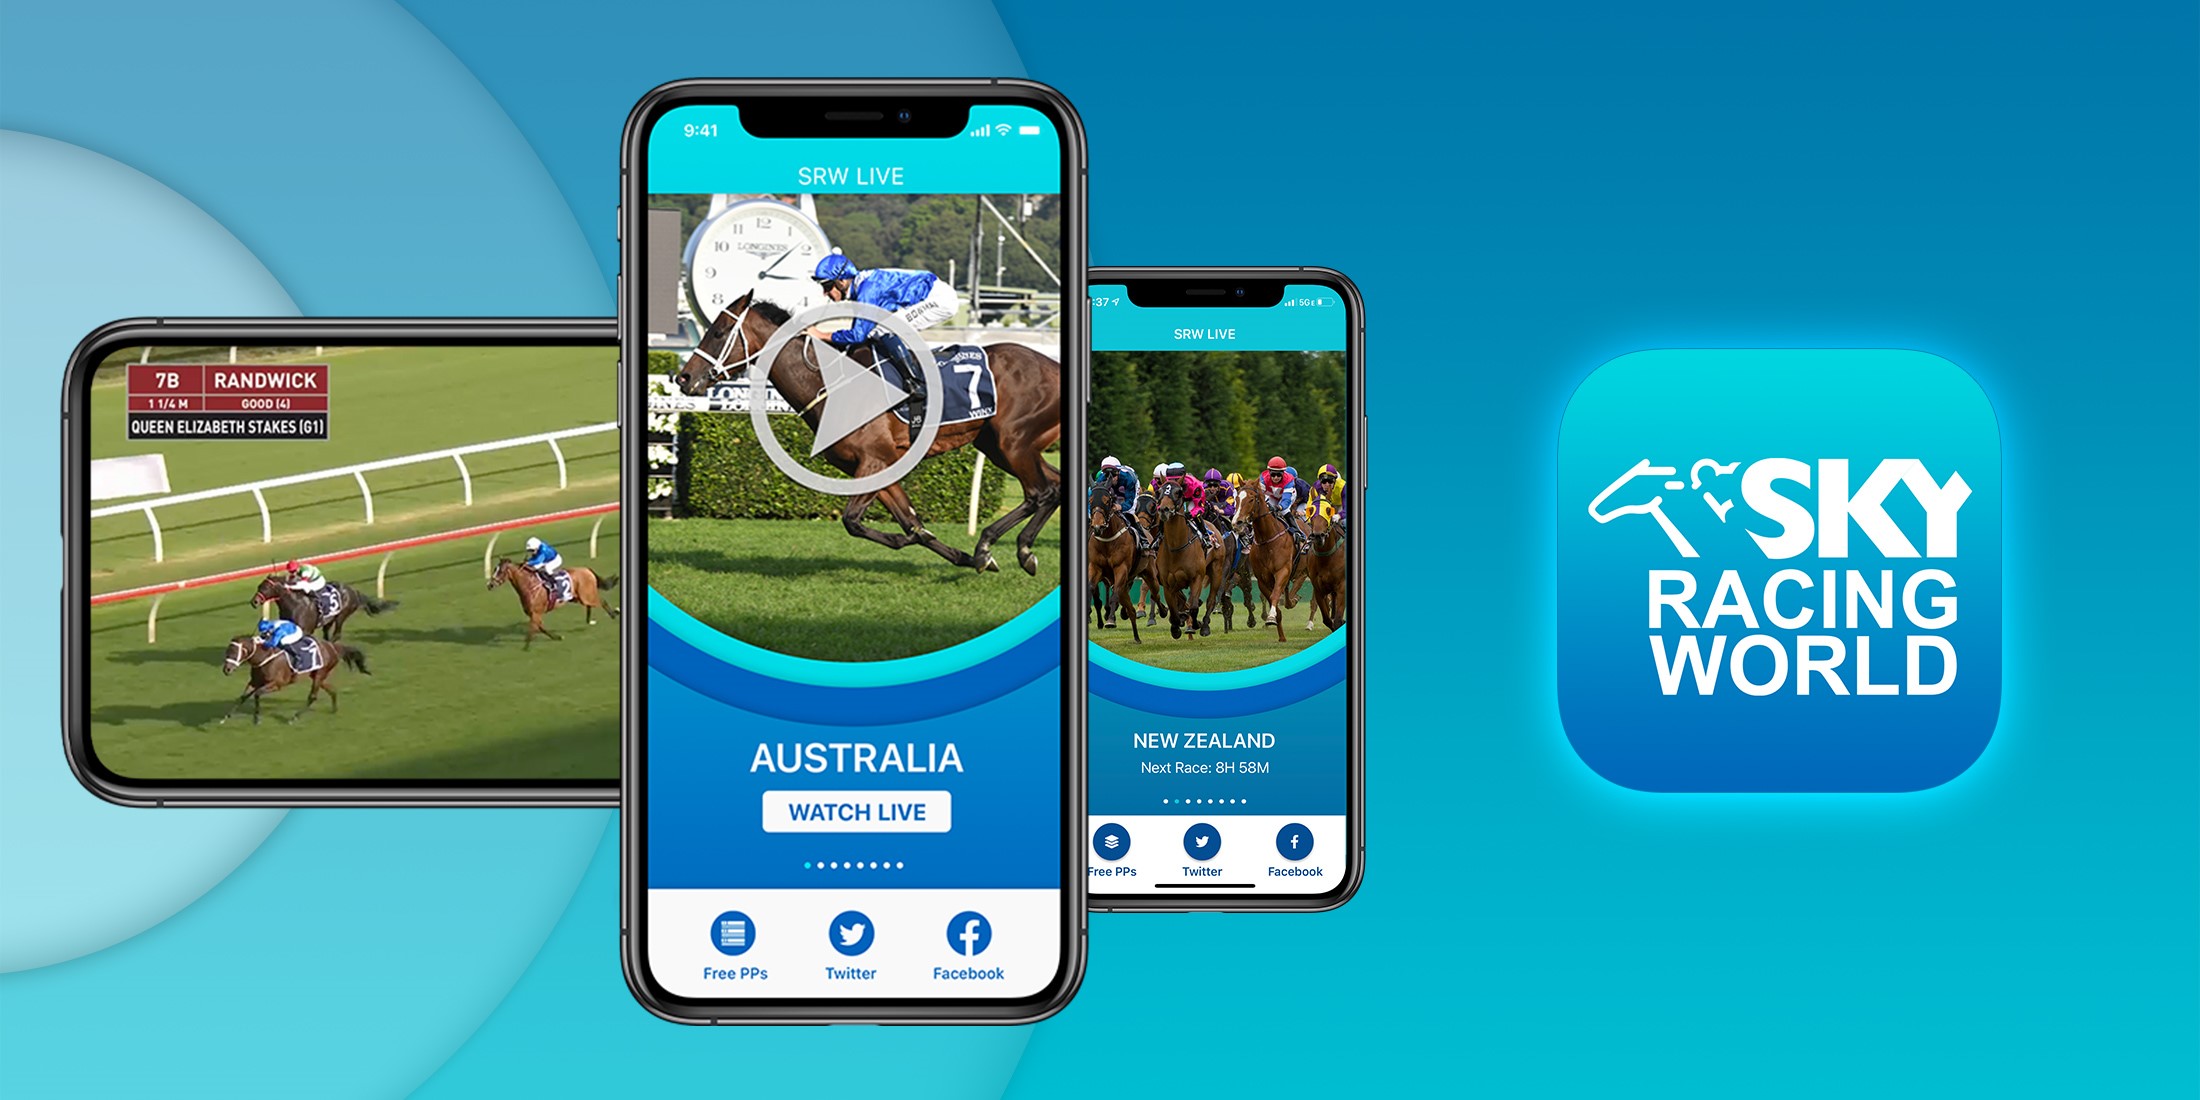 Sky Racing World Launches Free Live Streaming Mobile App